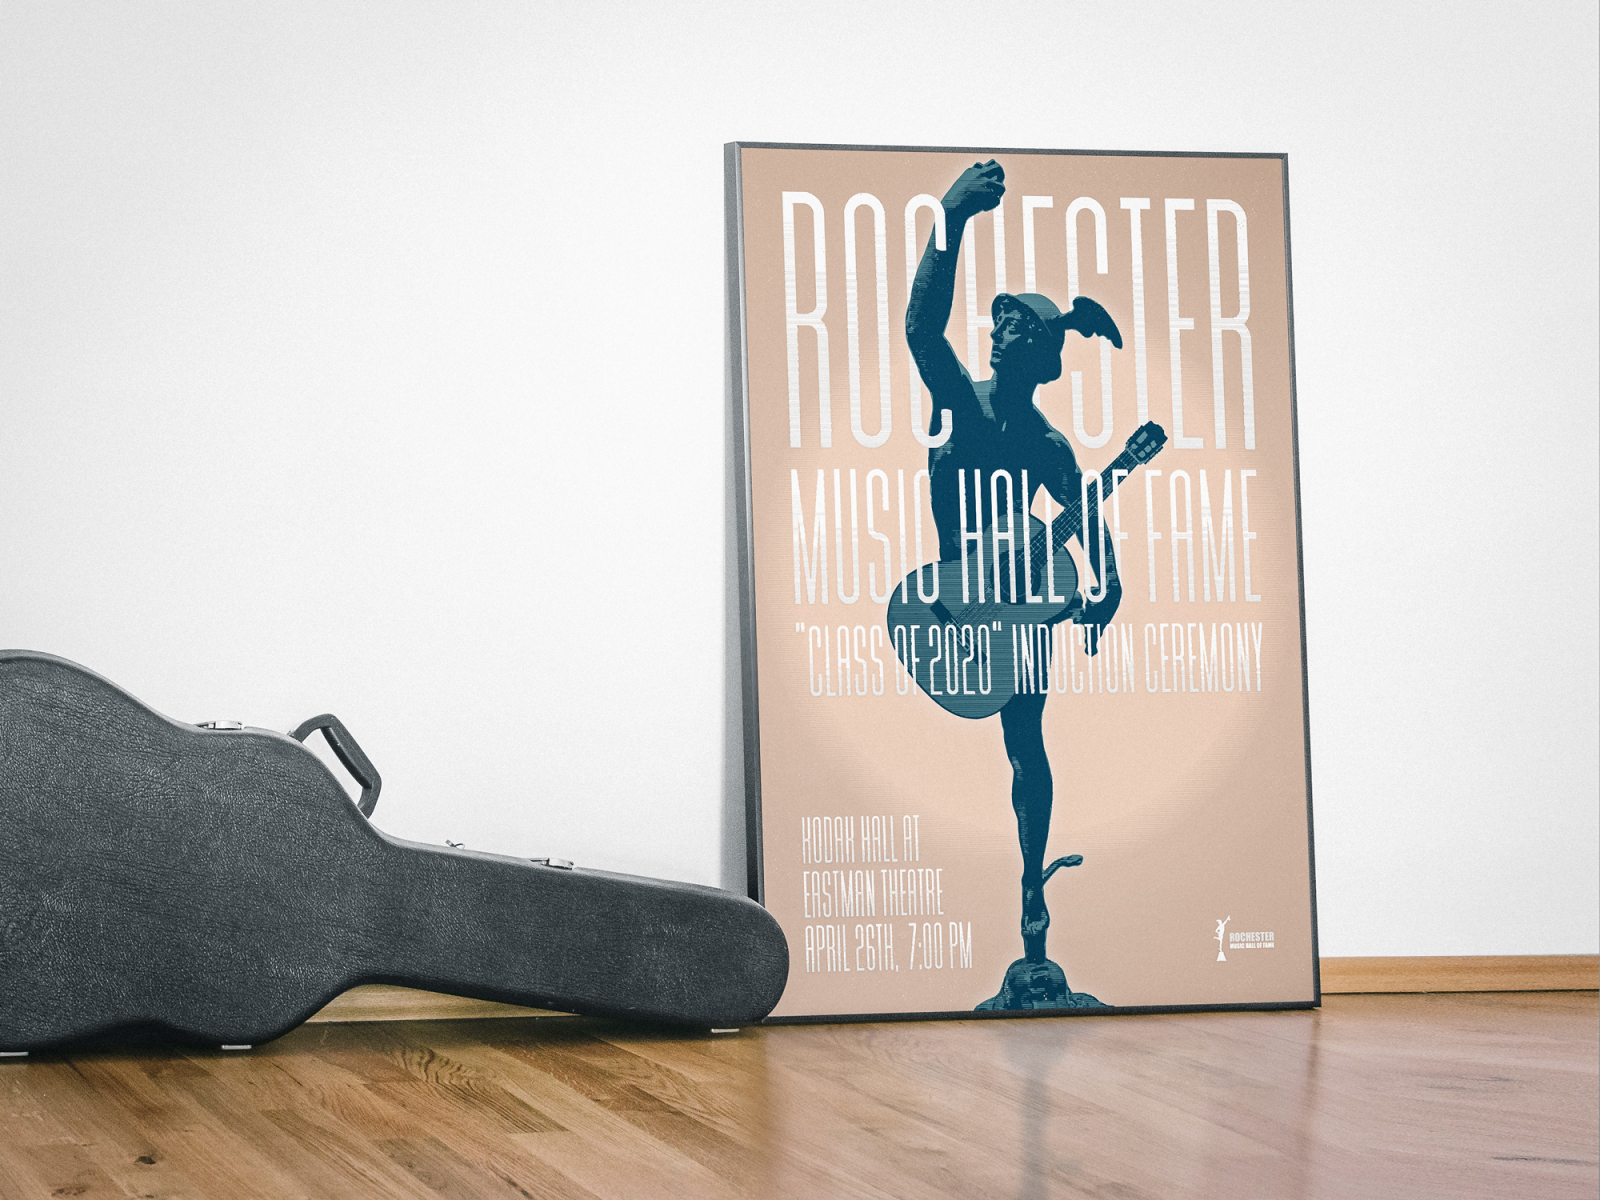 Rochester Music Hall of Fame / Poster by Attila Kantor on Dribbble